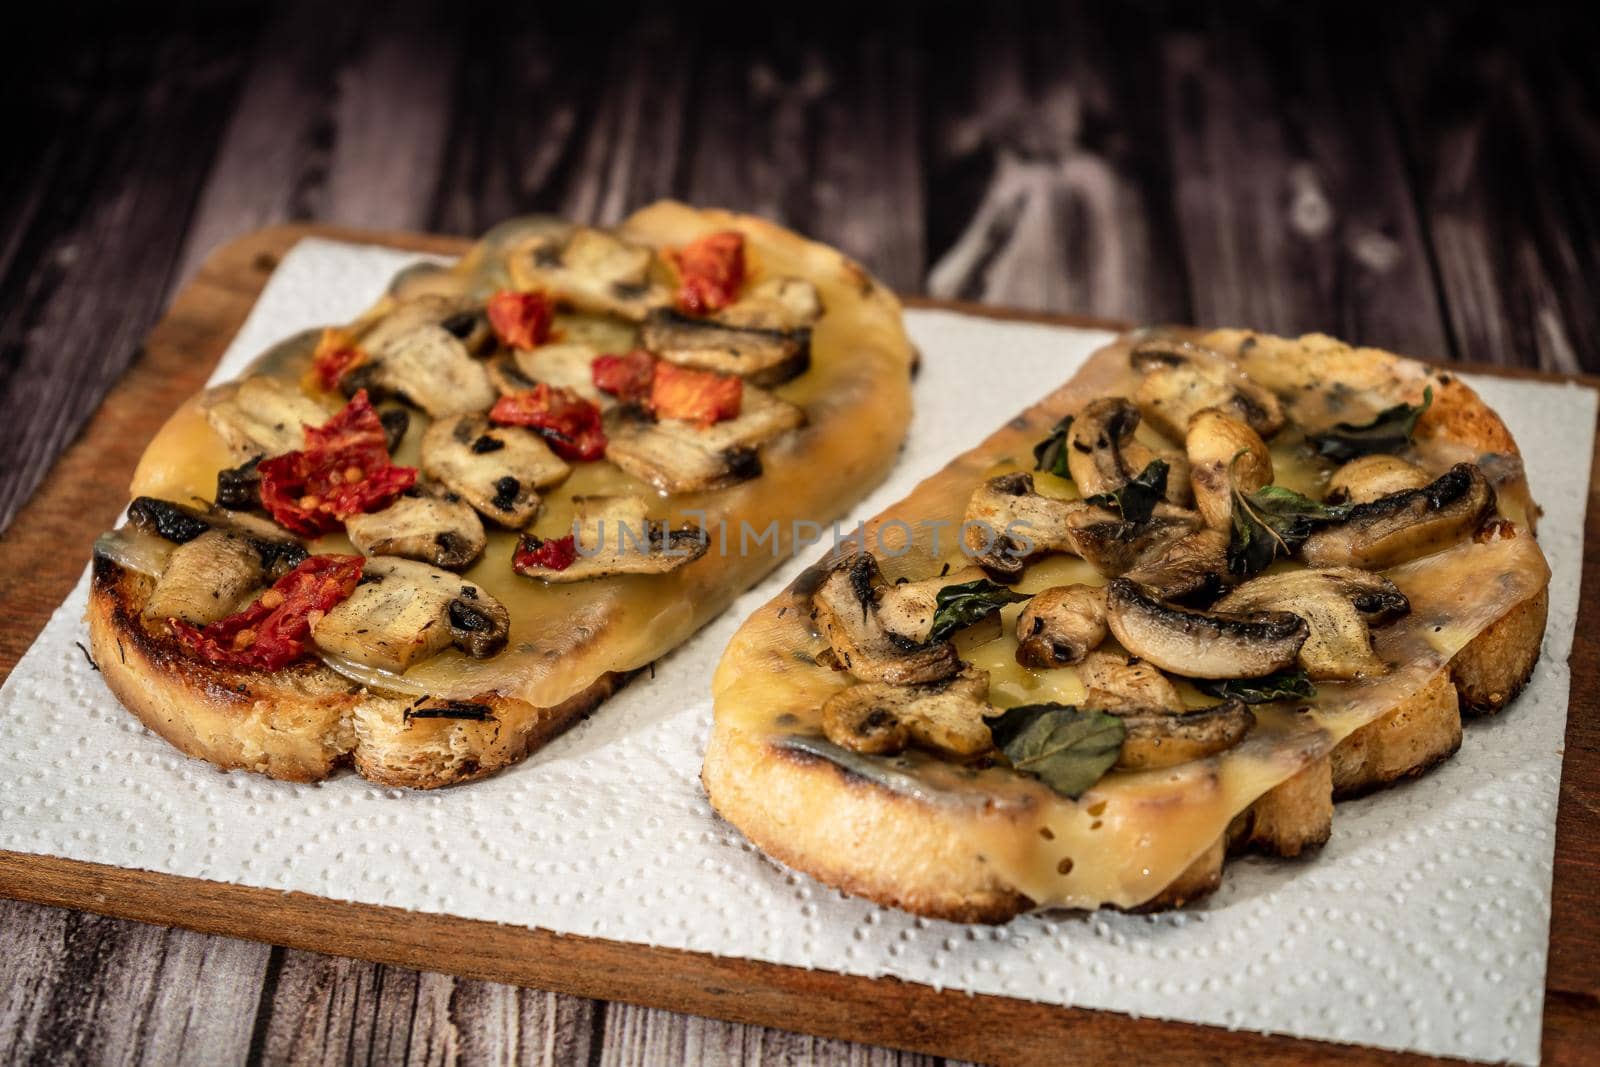 Large bruschettas with cheese, mushrooms, prosciutto and tomato in different combinations. Mediterranean food concept.